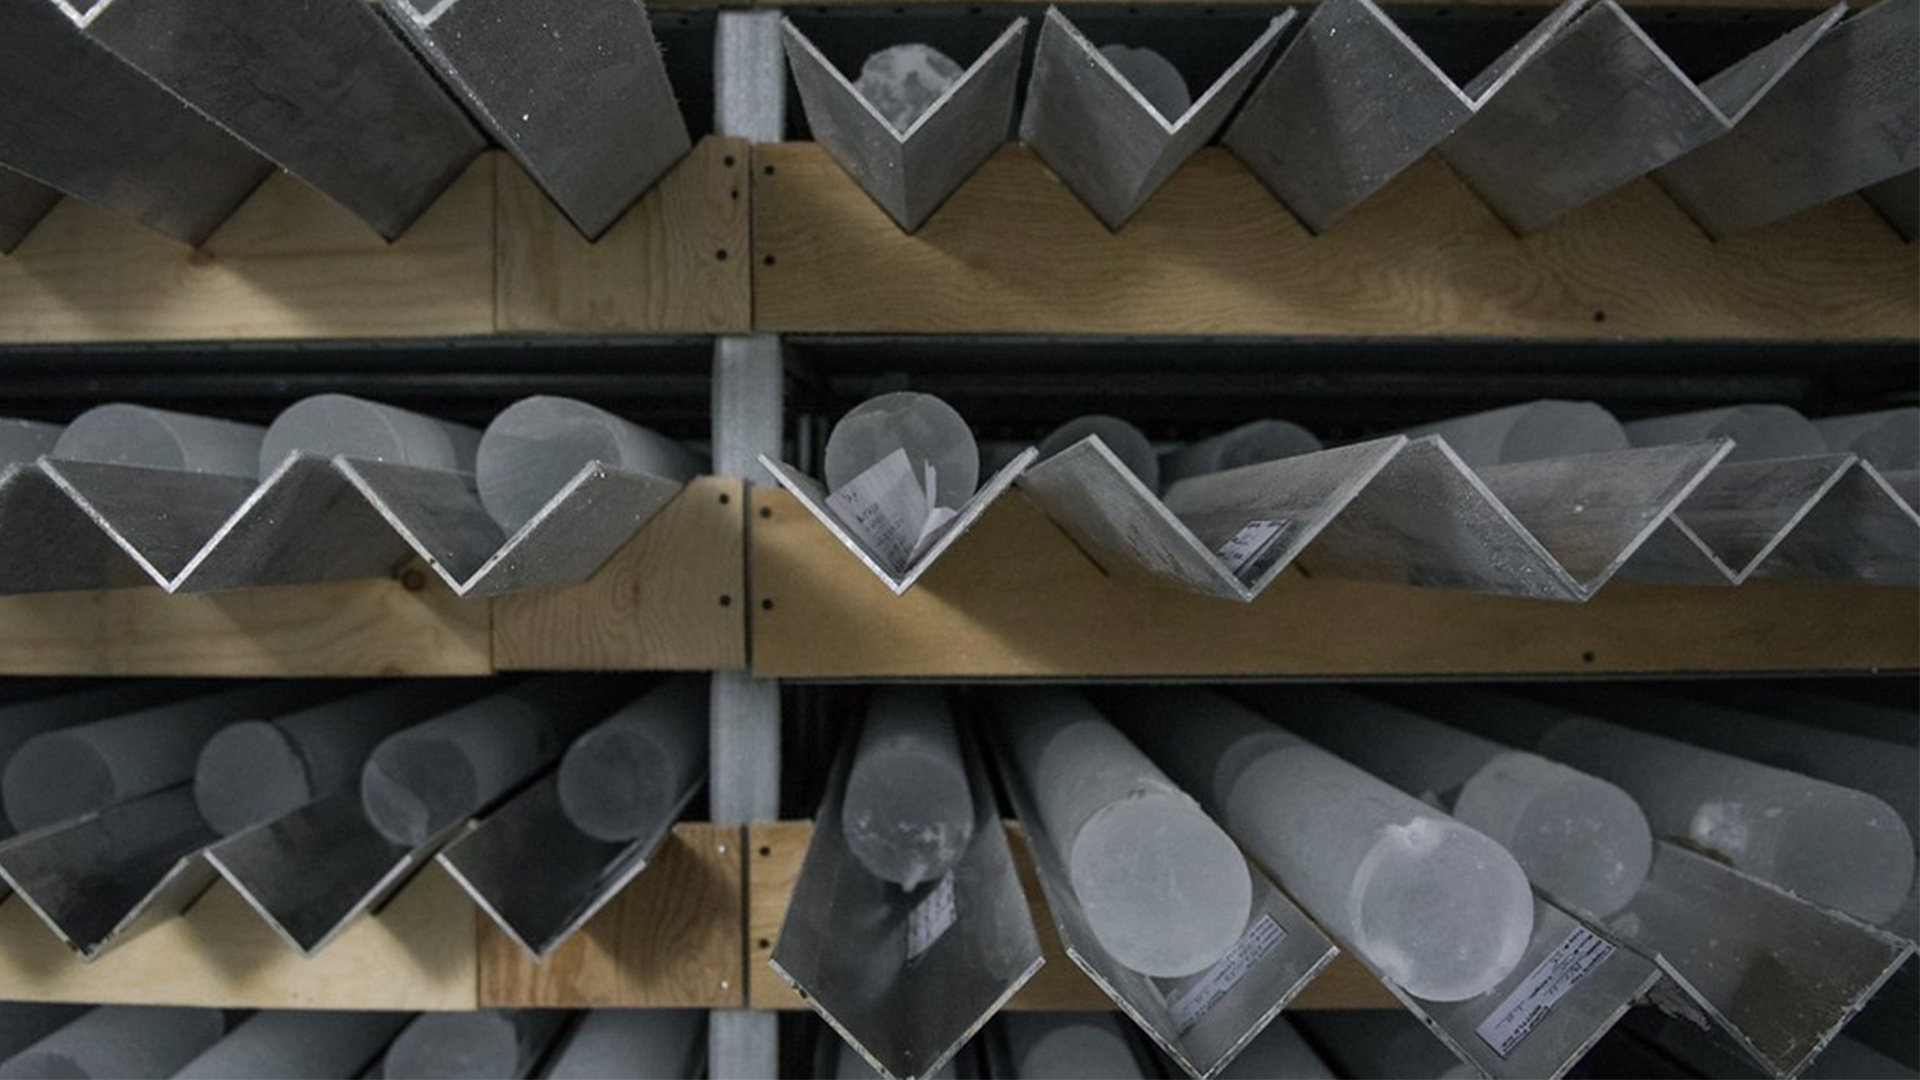 A collection of glacial ice cores can show a history of climate change.